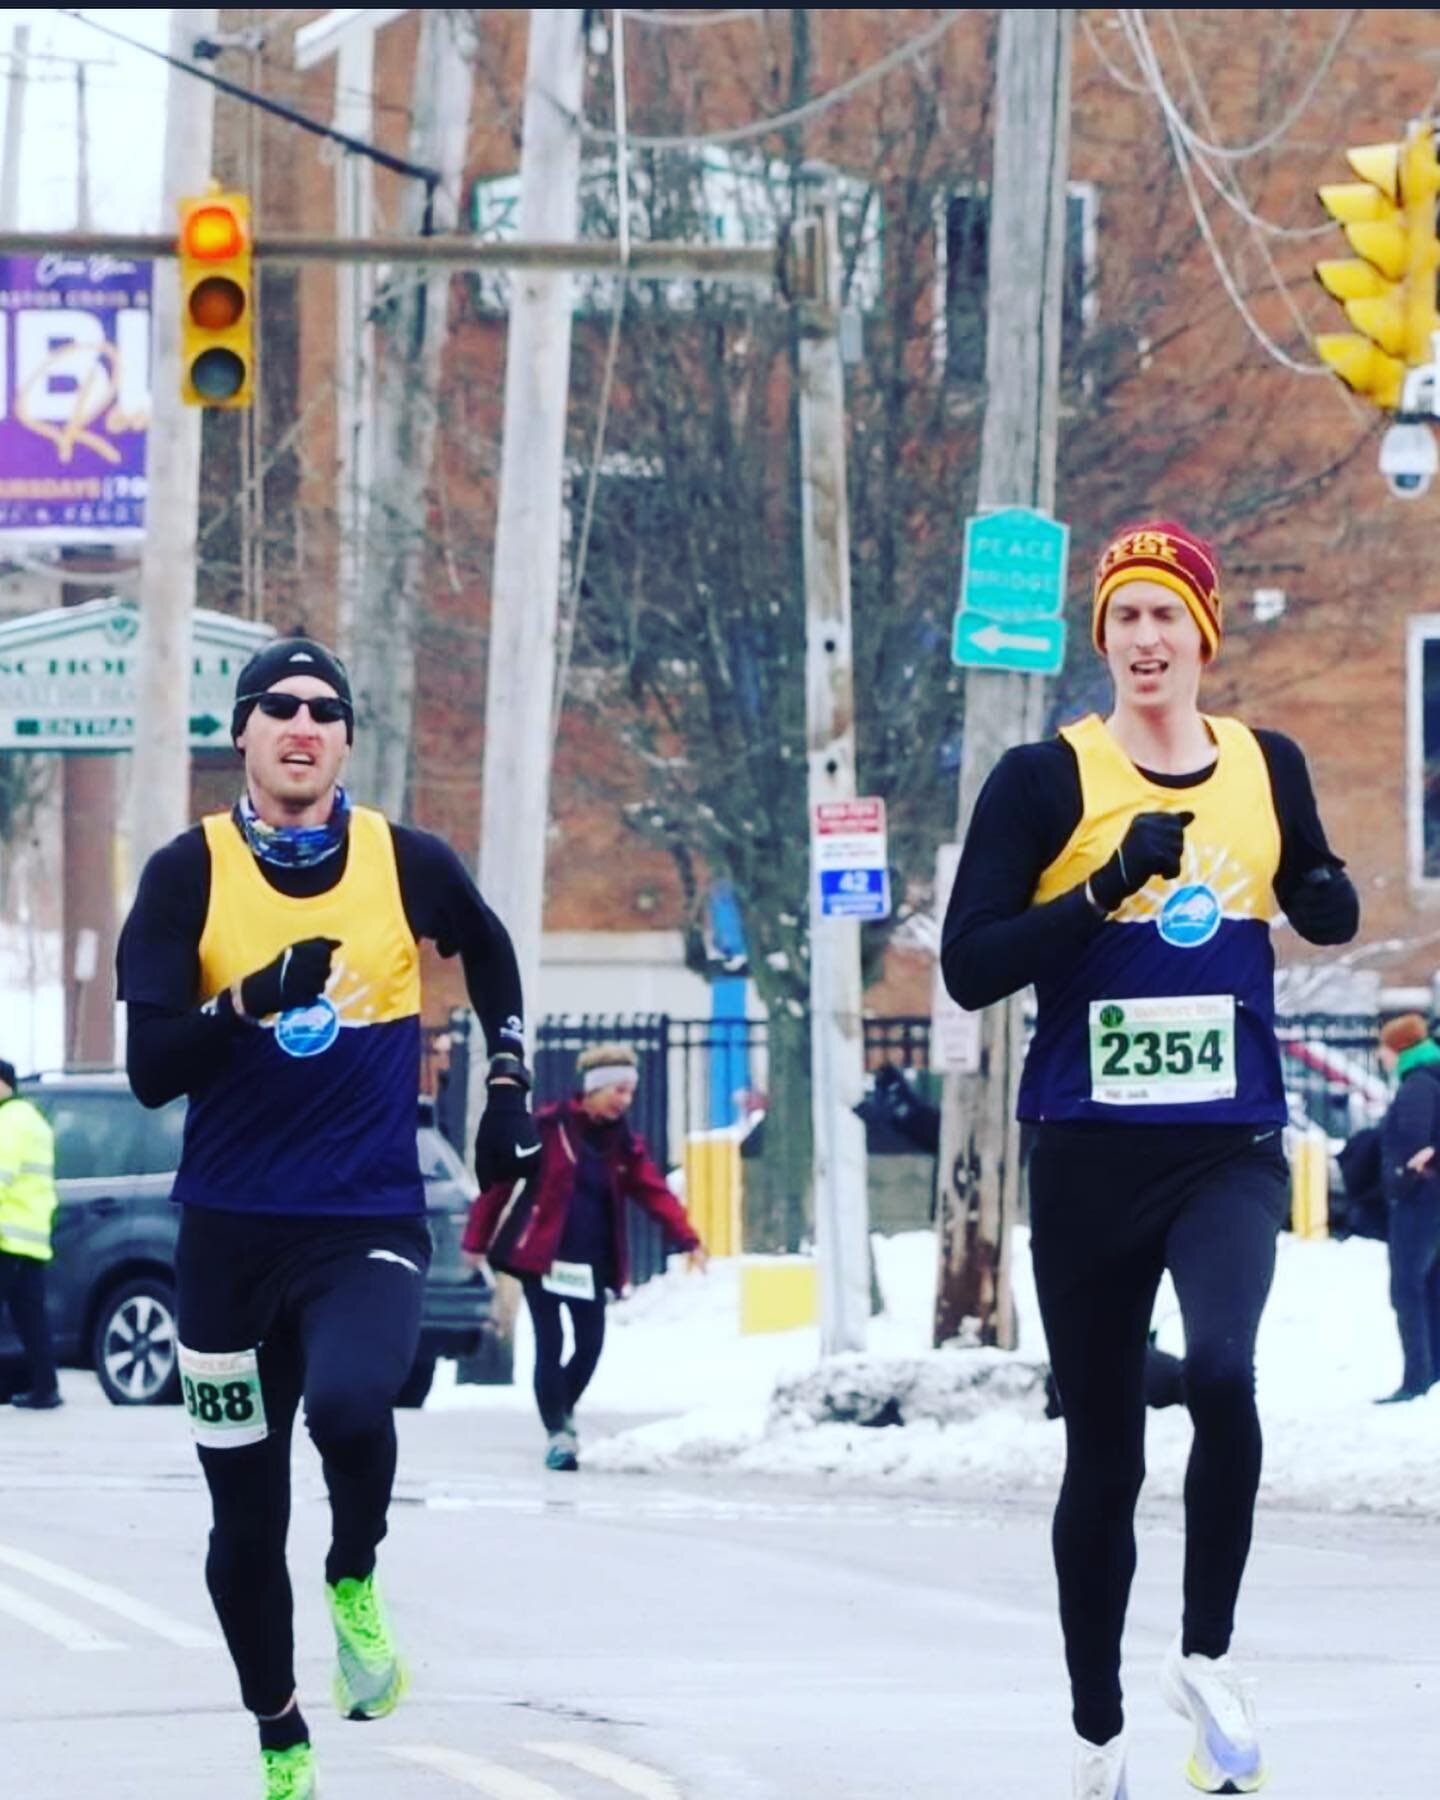 ECRC had some great running this weekend at the Buffalo Shamrock Race! It was a competitive field and we were happy to be a part of a great racing day! Thank you to @dianesardes for her great pictures as always! ⚡️&hearts;️ #ecrunclub #ECRC #buffalor